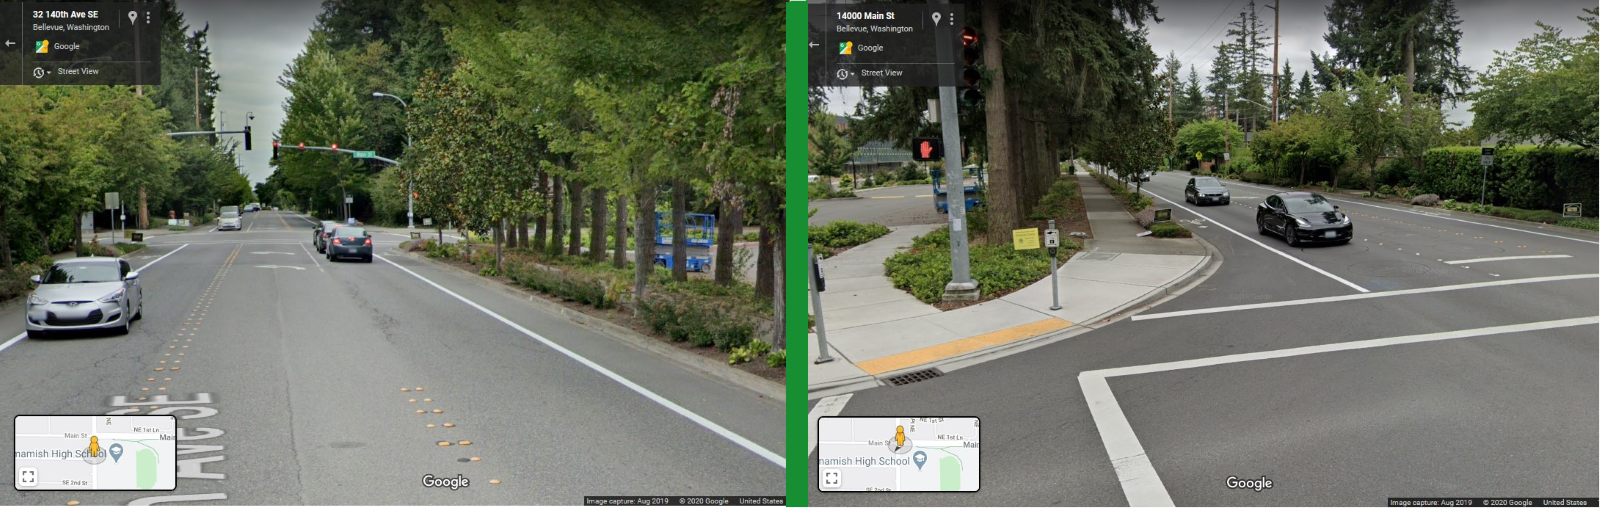 Left: 140th Ave looking northward as one approaches Main Street. (Google Streetview) Right: Looking South on 140th Ave from Main Street. Note the nearly two car lengths of space from the crosswalk to where the curb starts to curve to accommodate turning drivers. (Google Streetview)